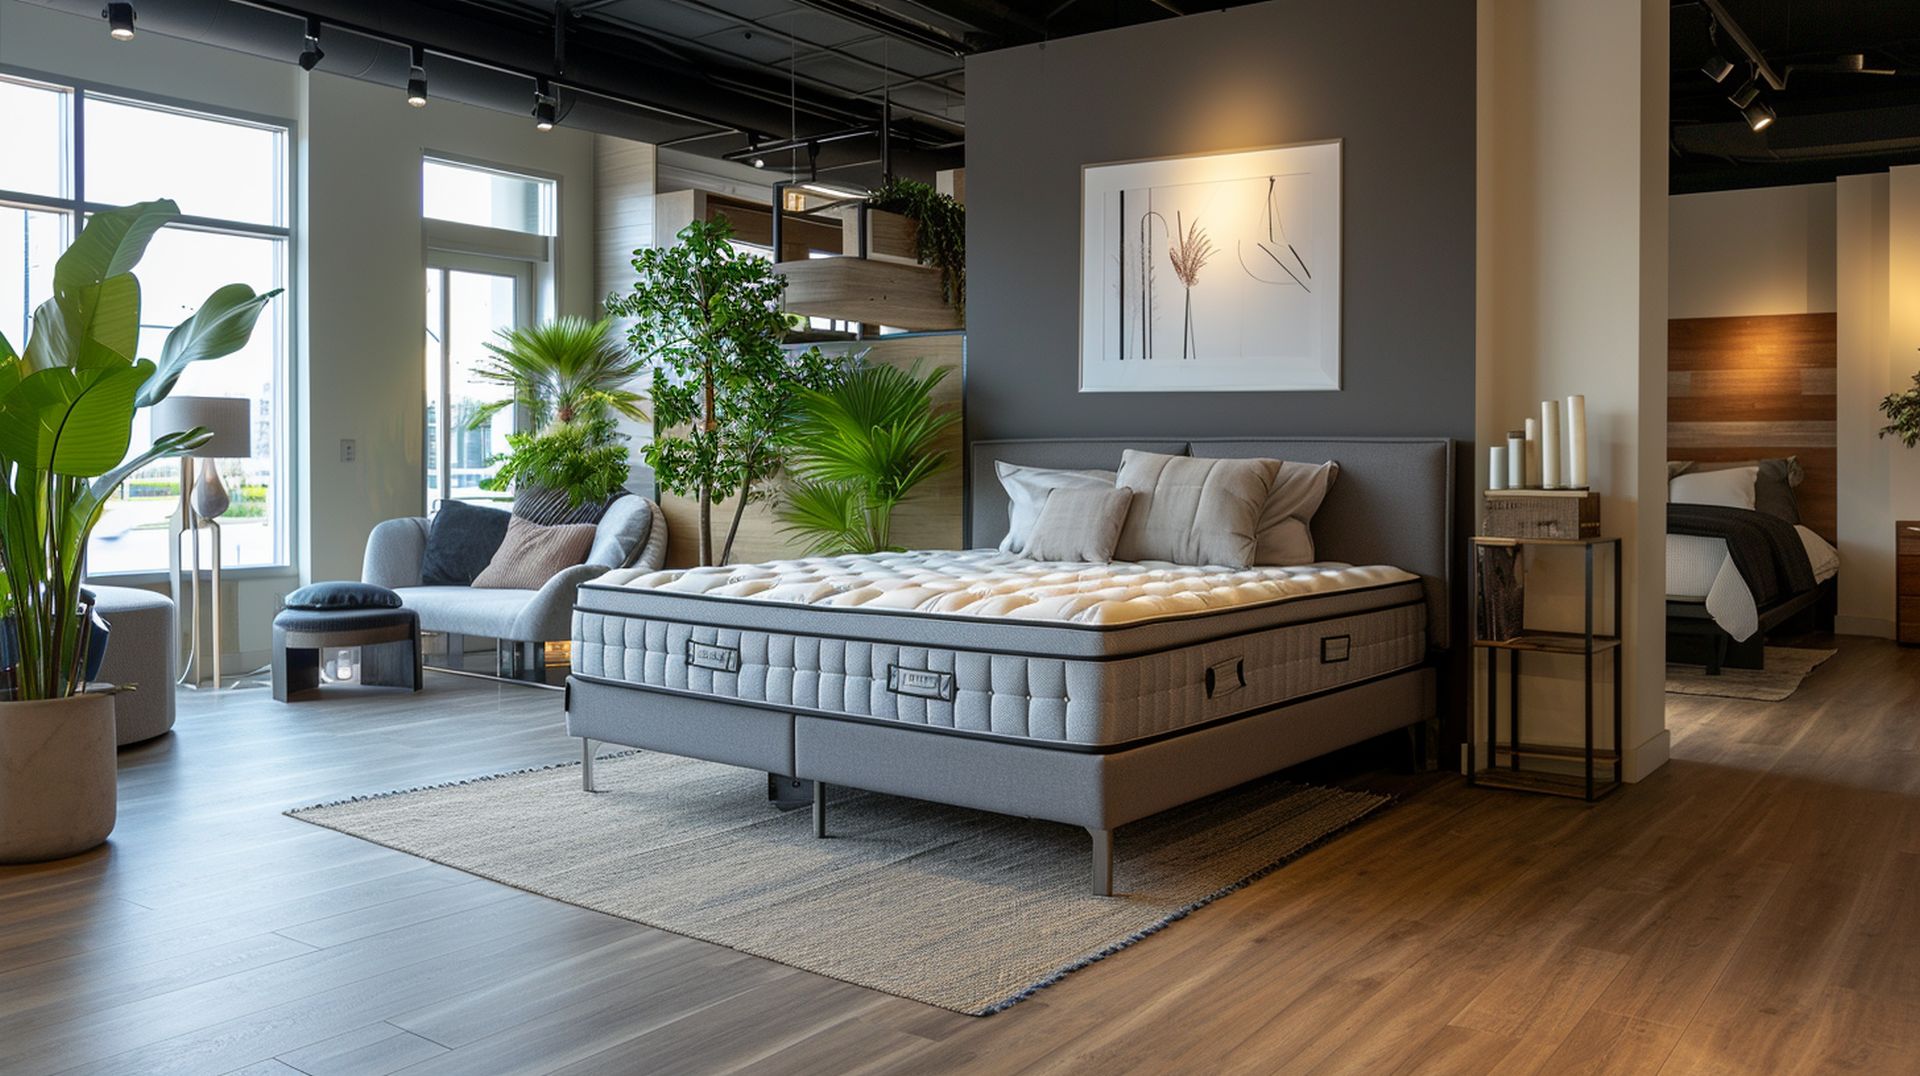 If you're looking for a new bed, mattress stores in Waldorf offer the best customer and delivery service, financing, and warranties in Maryland